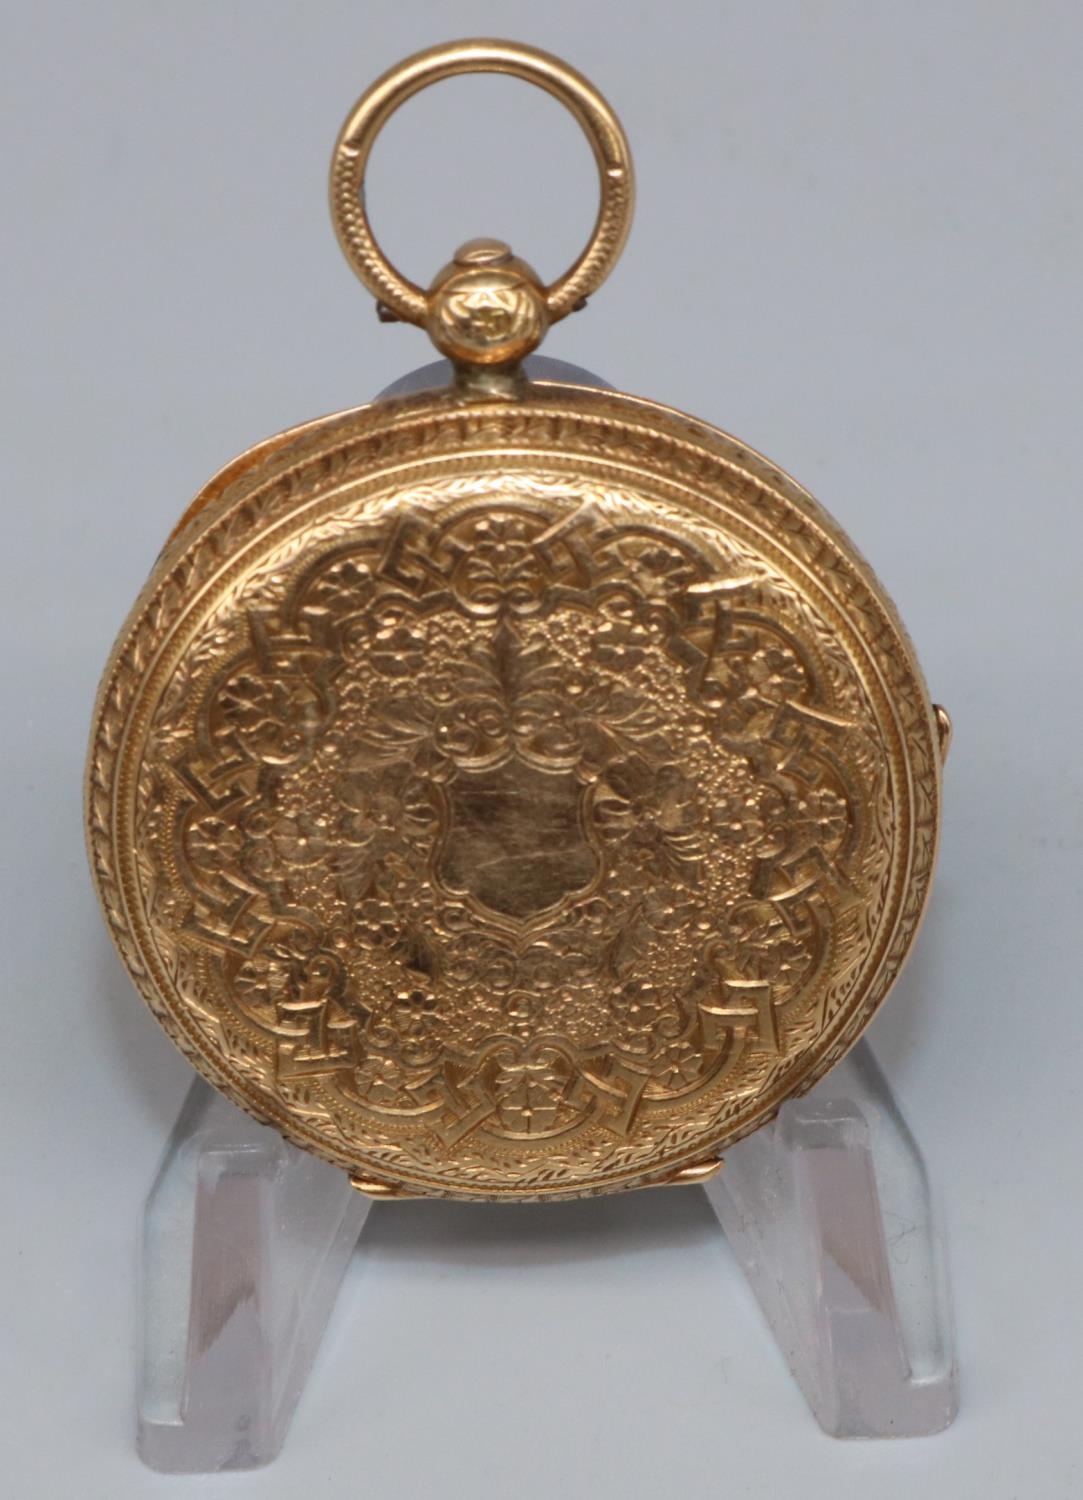 18ct gold hallmarked open faced key wound fob watch, floral and engine turned Roman dial, movement - Image 2 of 2